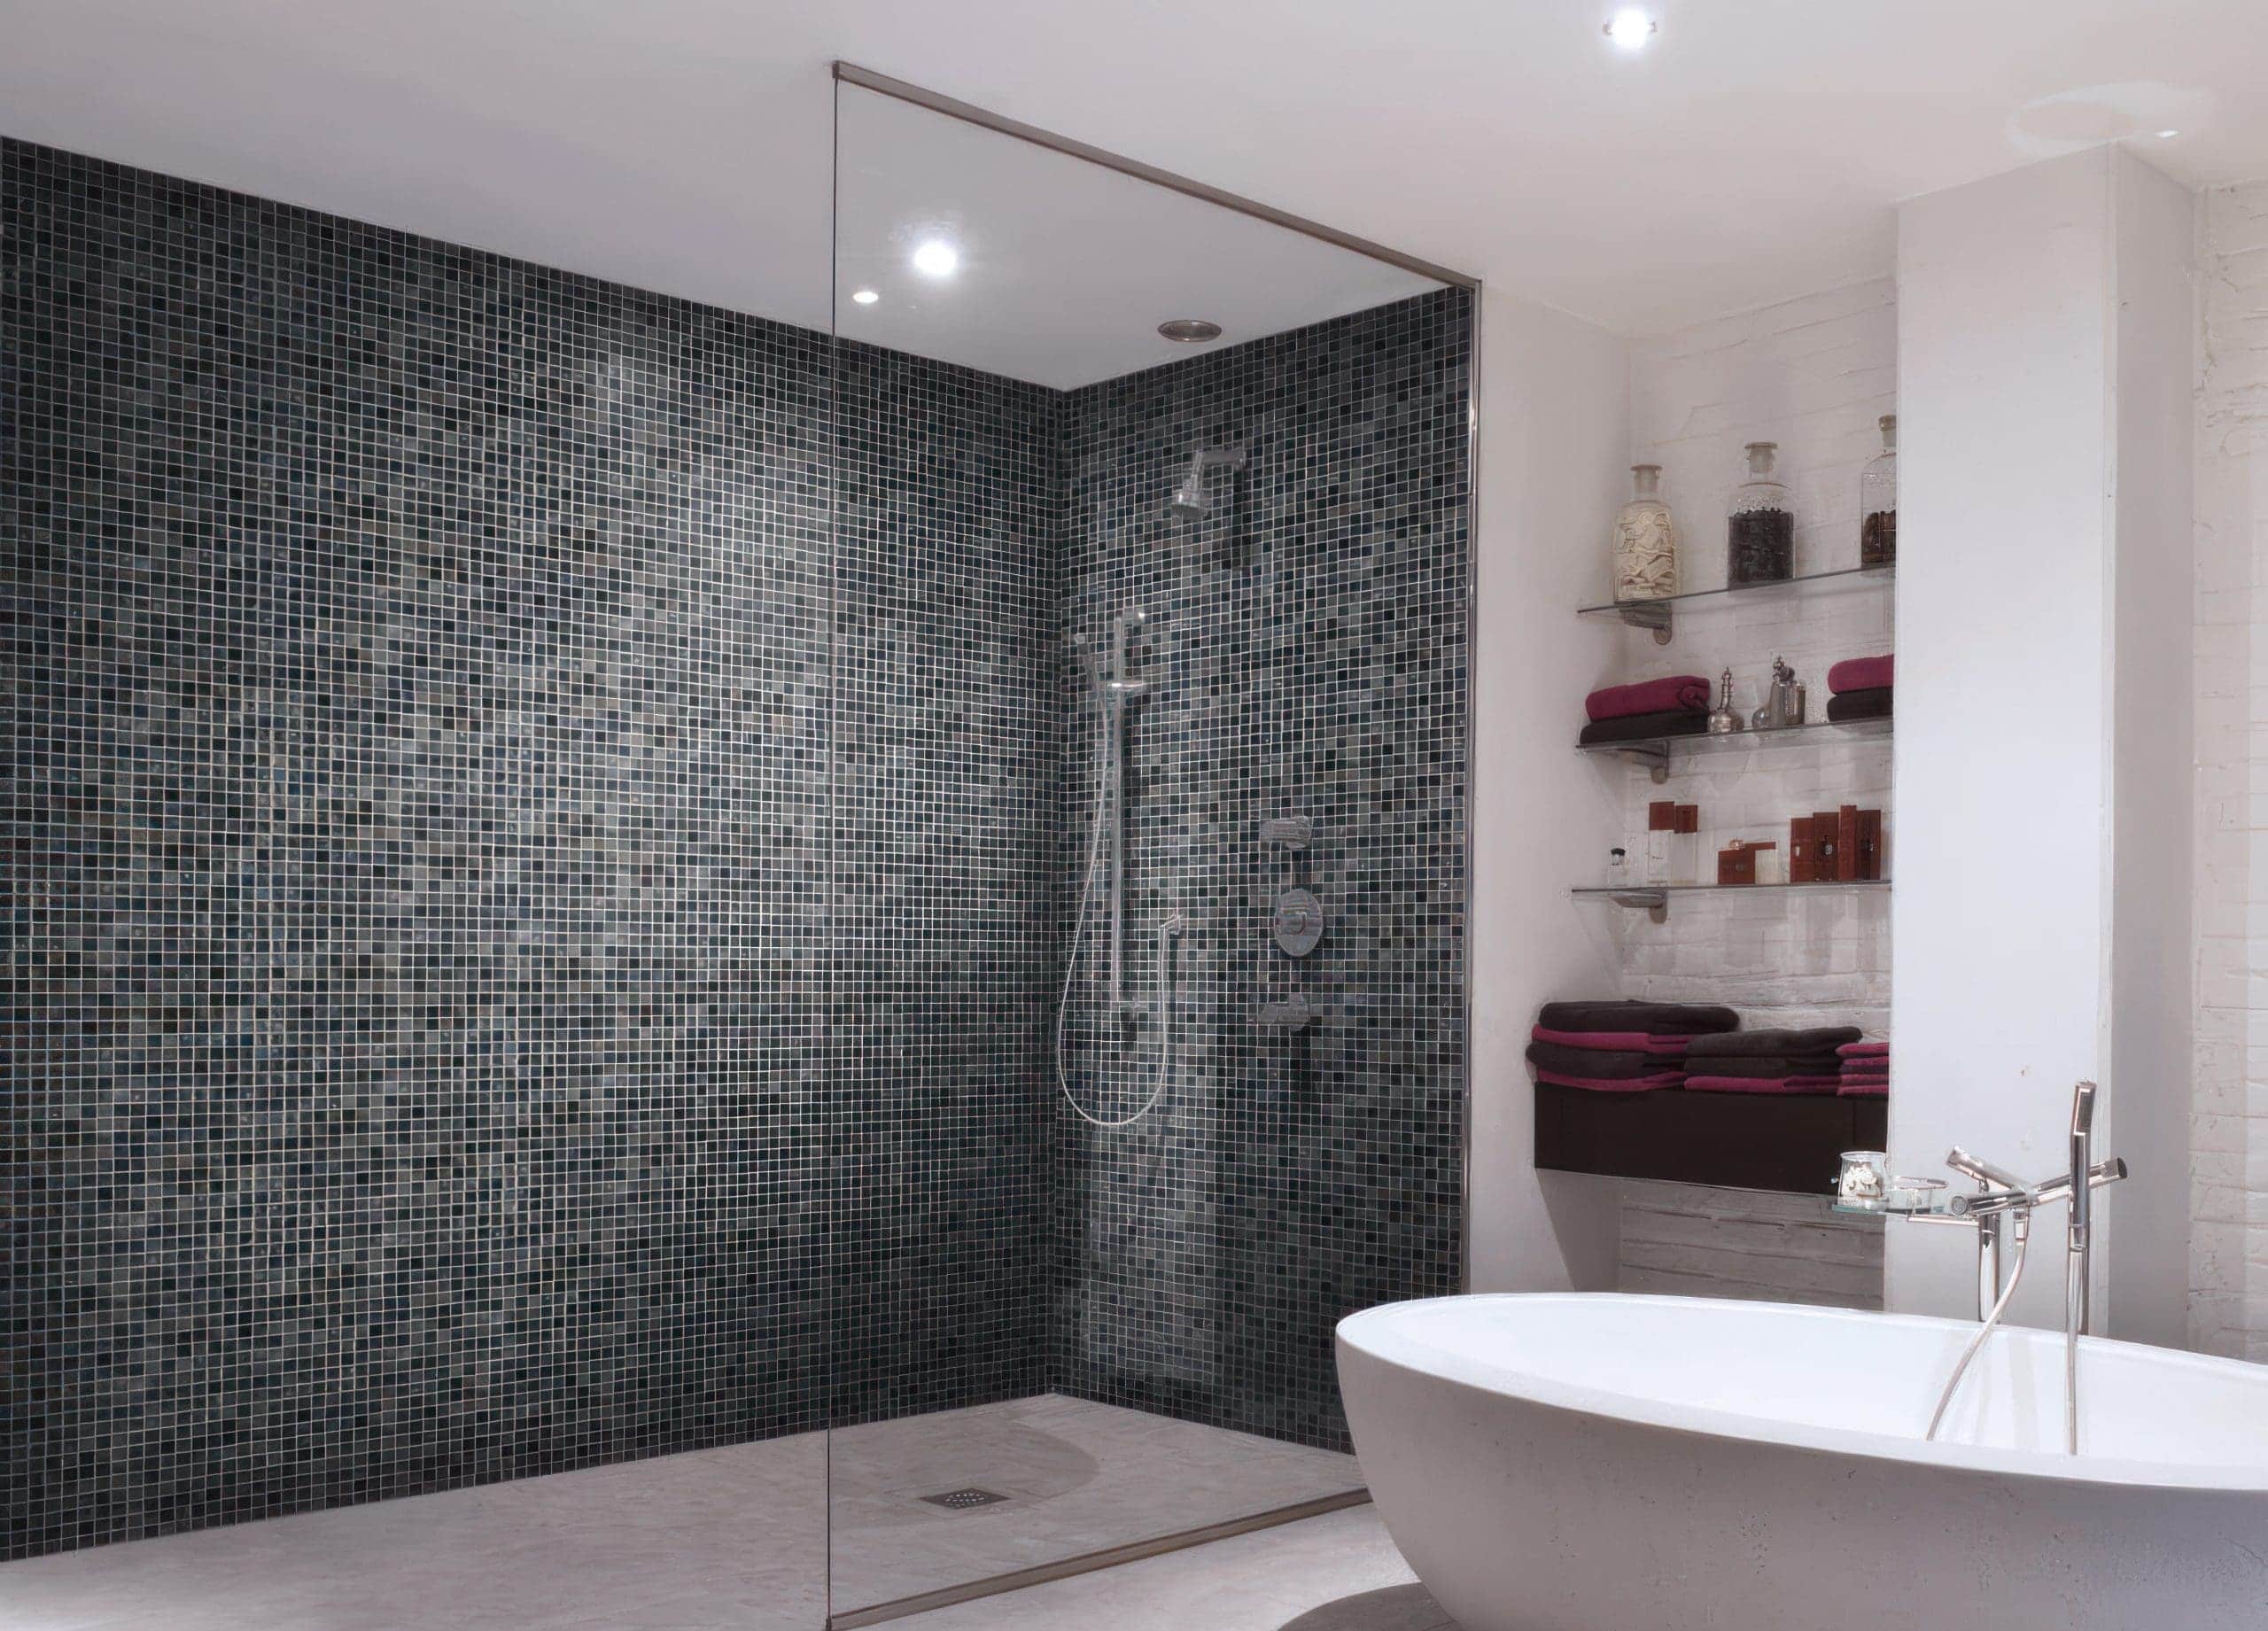 ARRECIFE IRDIS GREY_RMS TRADERS_NATURAL STONE POOL MOSAIC SUPPLIER MELBOURNE (5)x